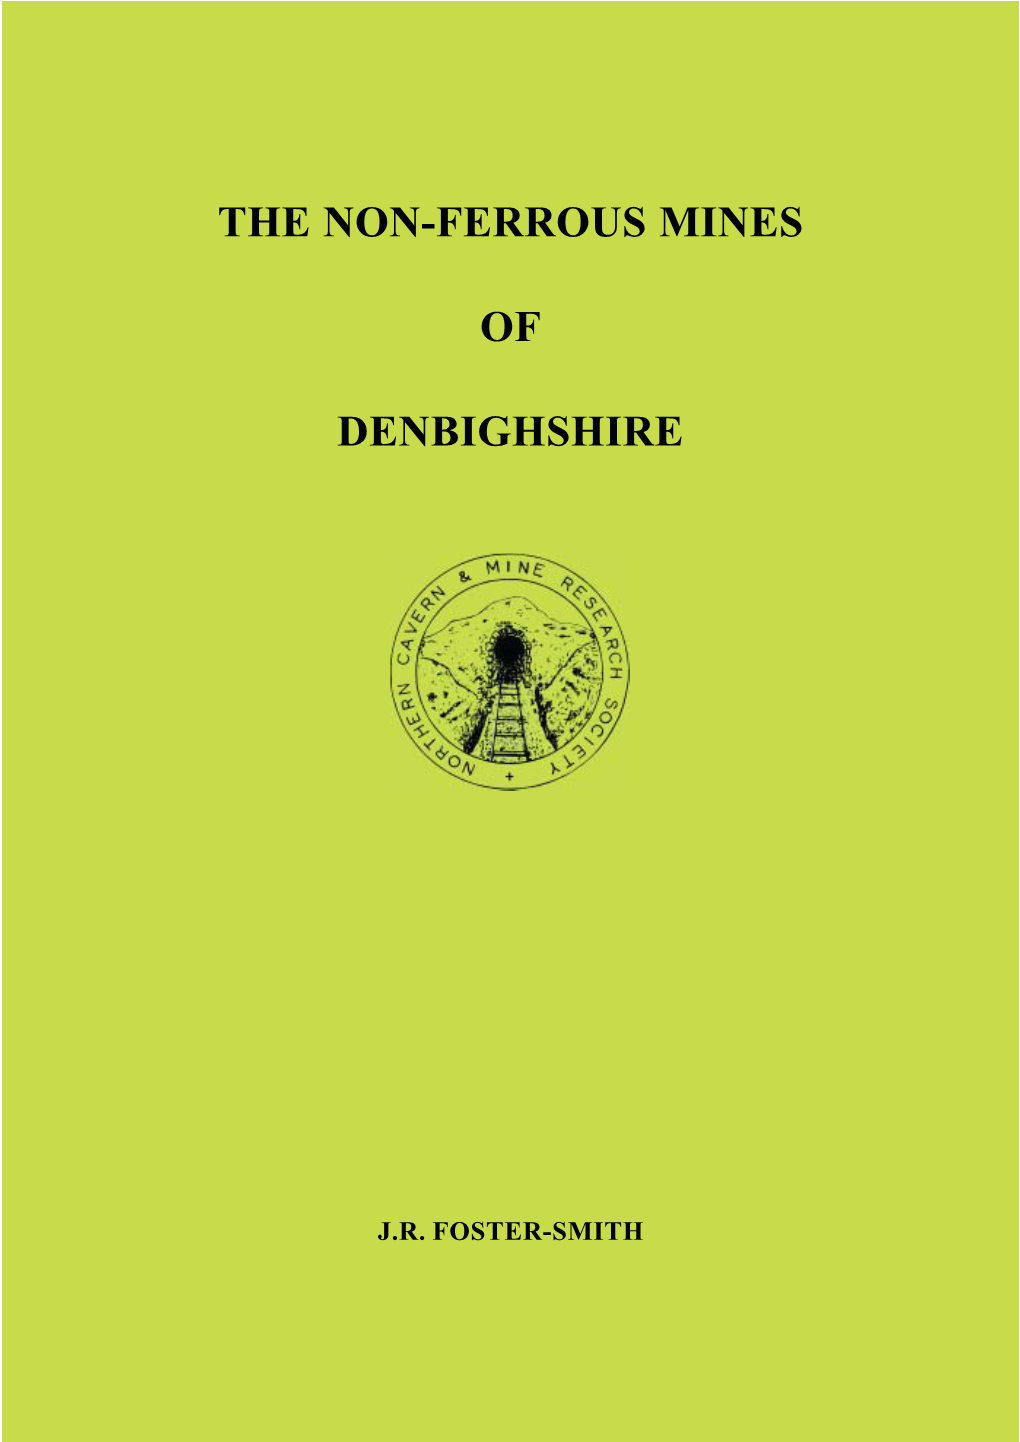 The Non-Ferrous Mines of Denbighshire.Pmd